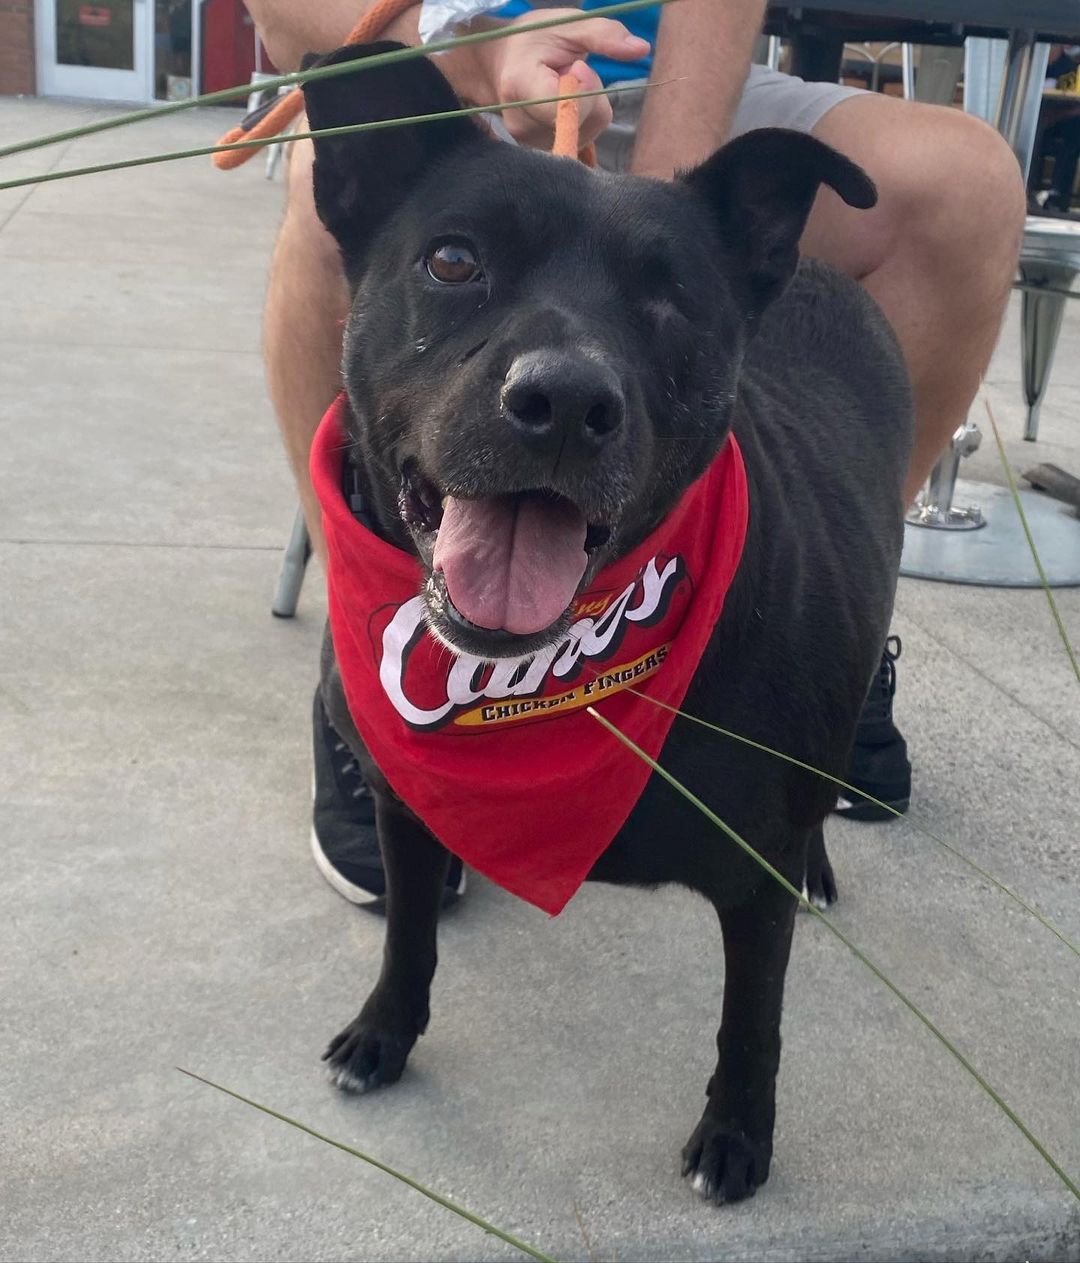 Come join us at @raisingcanes in Huntington Beach for dinner. ✨
SWIPE for some adorable pics of our <a target='_blank' href='https://www.instagram.com/explore/tags/adoptable/'>#adoptable</a> dogs that are at the event tonight! ♥️

✔️Donate: pricelesspetrescue.org/donate/
✔️Venmo: @pricelesspetrescue
✔️PayPal: priceless.pets@yahoo.com
✔️Wishlist: shorturl.at/tBCKS
____________________________________________________
<a target='_blank' href='https://www.instagram.com/explore/tags/pricelesspetrescue/'>#pricelesspetrescue</a> <a target='_blank' href='https://www.instagram.com/explore/tags/pricelesspets/'>#pricelesspets</a> <a target='_blank' href='https://www.instagram.com/explore/tags/adopt/'>#adopt</a> <a target='_blank' href='https://www.instagram.com/explore/tags/rescue/'>#rescue</a> <a target='_blank' href='https://www.instagram.com/explore/tags/costamesa/'>#costamesa</a> <a target='_blank' href='https://www.instagram.com/explore/tags/claremont/'>#claremont</a> <a target='_blank' href='https://www.instagram.com/explore/tags/chinohills/'>#chinohills</a> <a target='_blank' href='https://www.instagram.com/explore/tags/inlandempire/'>#inlandempire</a> <a target='_blank' href='https://www.instagram.com/explore/tags/orangecounty/'>#orangecounty</a> <a target='_blank' href='https://www.instagram.com/explore/tags/lacounty/'>#lacounty</a> <a target='_blank' href='https://www.instagram.com/explore/tags/dogsrock/'>#dogsrock</a> <a target='_blank' href='https://www.instagram.com/explore/tags/dogsinneed/'>#dogsinneed</a> <a target='_blank' href='https://www.instagram.com/explore/tags/adoptme/'>#adoptme</a> <a target='_blank' href='https://www.instagram.com/explore/tags/petsofinstagram/'>#petsofinstagram</a> <a target='_blank' href='https://www.instagram.com/explore/tags/dogsofinstagram/'>#dogsofinstagram</a> <a target='_blank' href='https://www.instagram.com/explore/tags/dogstagram/'>#dogstagram</a> <a target='_blank' href='https://www.instagram.com/explore/tags/catsofinstagram/'>#catsofinstagram</a> <a target='_blank' href='https://www.instagram.com/explore/tags/catsinneed/'>#catsinneed</a> <a target='_blank' href='https://www.instagram.com/explore/tags/catsrock/'>#catsrock</a> <a target='_blank' href='https://www.instagram.com/explore/tags/catstagram/'>#catstagram</a> <a target='_blank' href='https://www.instagram.com/explore/tags/rabbitstagram/'>#rabbitstagram</a> <a target='_blank' href='https://www.instagram.com/explore/tags/rabbitsofinstagram/'>#rabbitsofinstagram</a> <a target='_blank' href='https://www.instagram.com/explore/tags/rabbitsofig/'>#rabbitsofig</a> <a target='_blank' href='https://www.instagram.com/explore/tags/rescuebunnies/'>#rescuebunnies</a> <a target='_blank' href='https://www.instagram.com/explore/tags/petrescue/'>#petrescue</a> <a target='_blank' href='https://www.instagram.com/explore/tags/nokillshelter/'>#nokillshelter</a> <a target='_blank' href='https://www.instagram.com/explore/tags/nonprofit/'>#nonprofit</a>